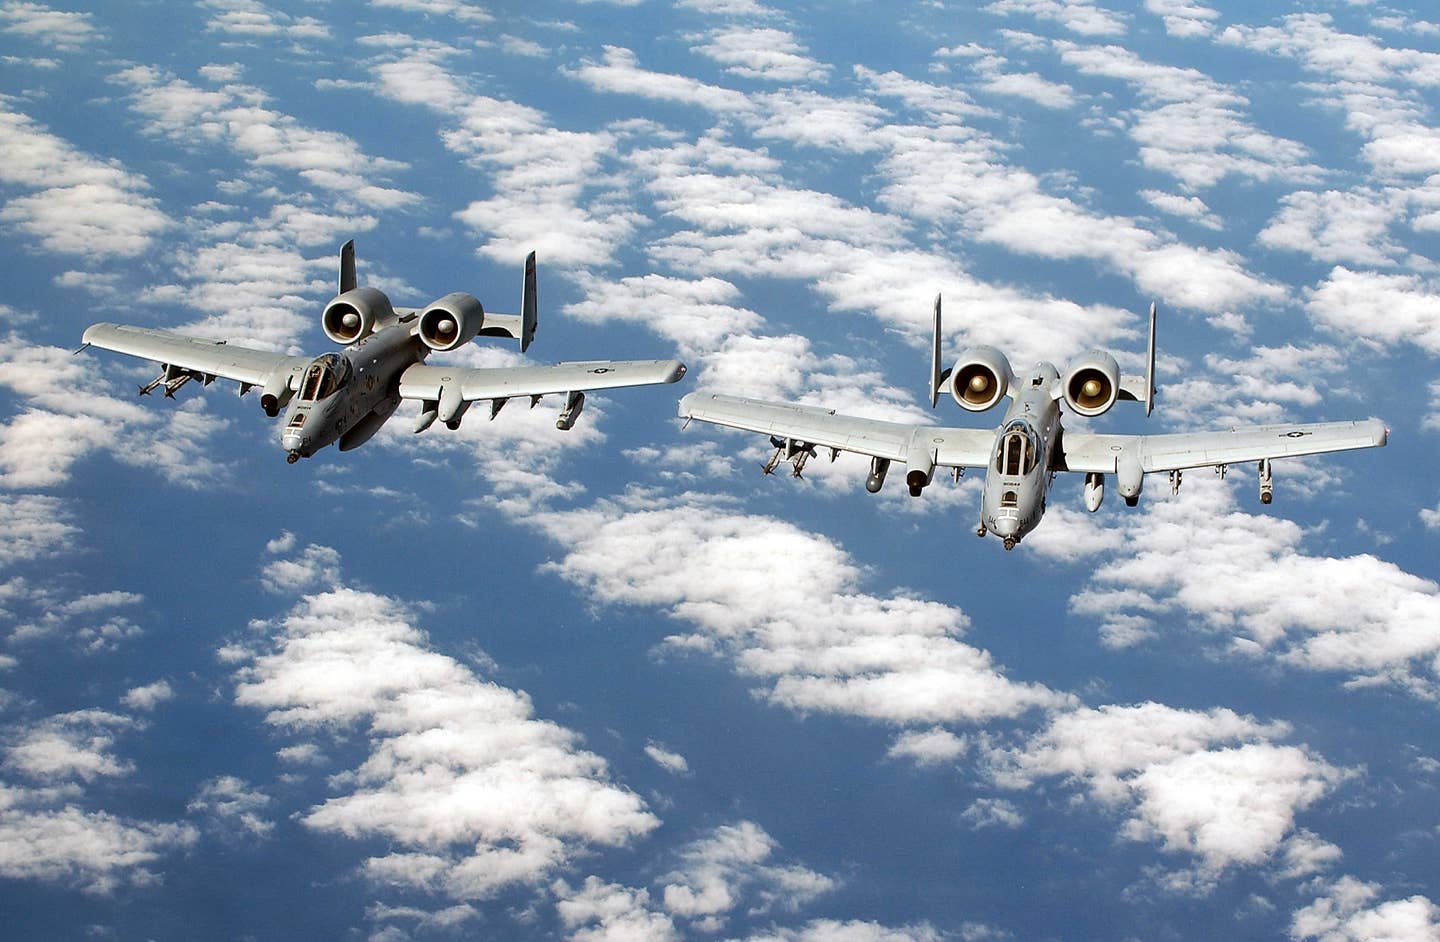 A pair of A-10 Warthogs from the 104th Fighter Wing. <em>Credit: Master Sgt. Mark Bucher/U.S. Air Force</em>